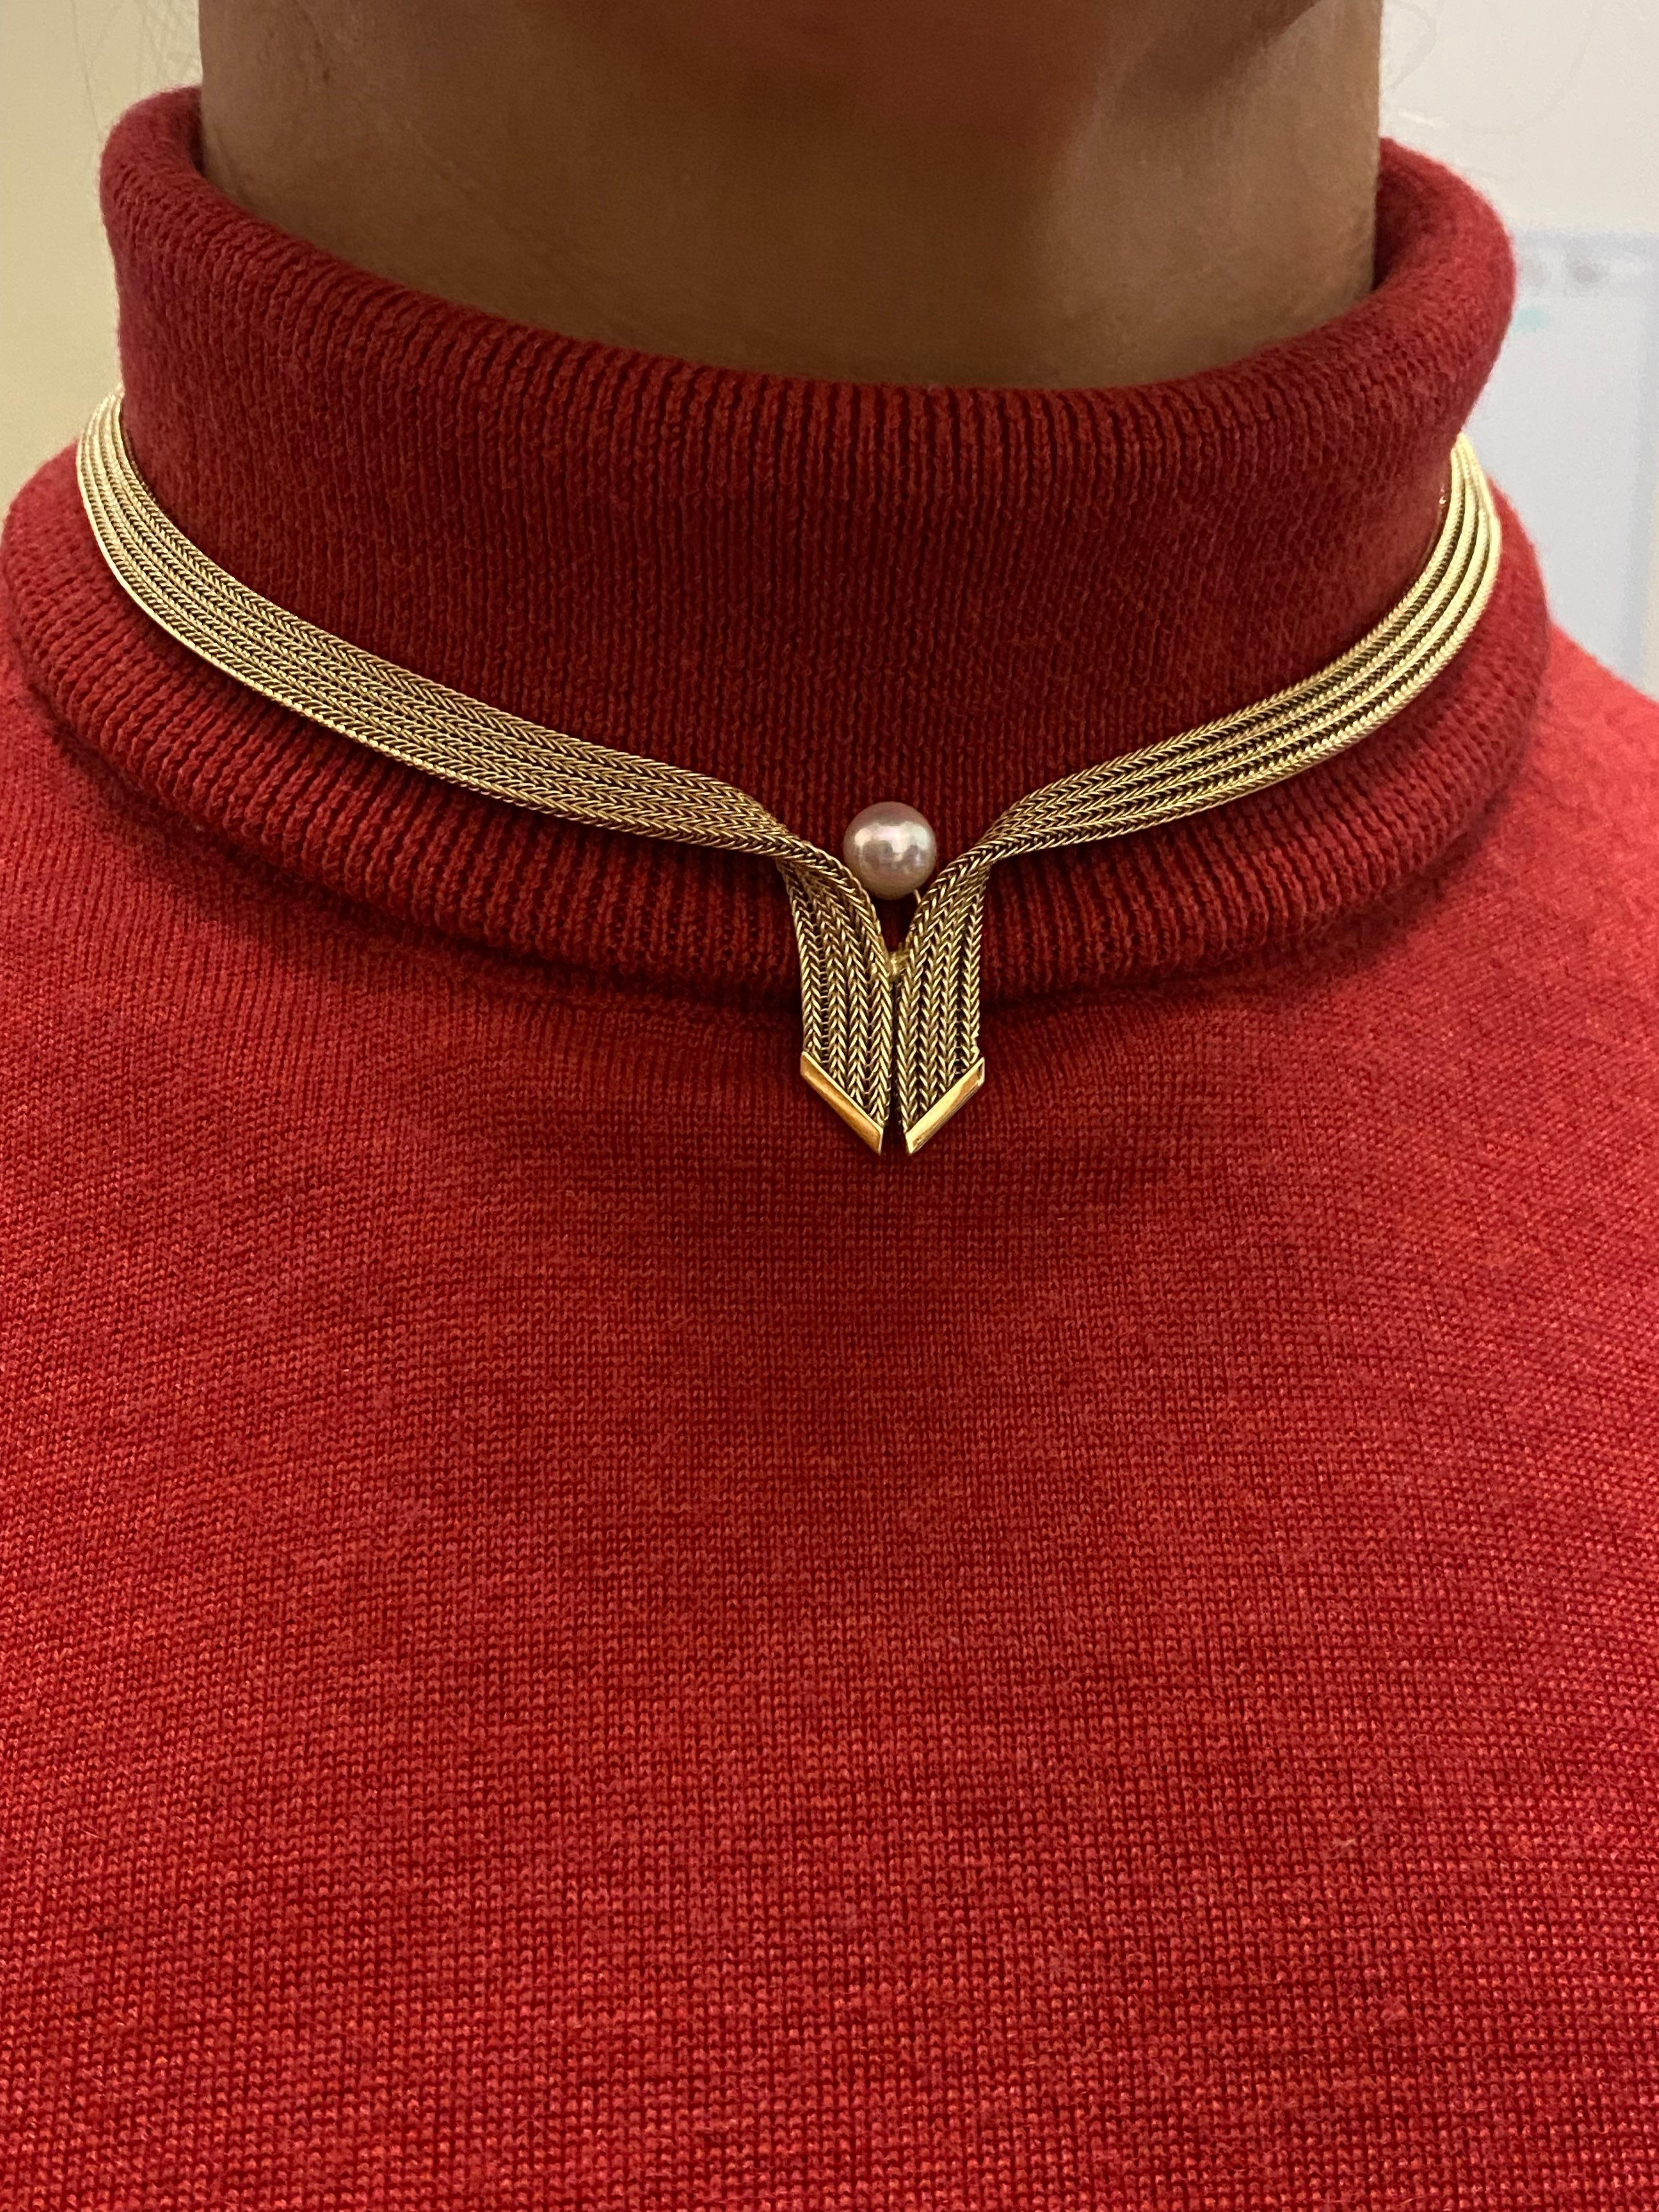 This Magnificent Piece of Jewelry is Retro,

dating back to year of 1963 

yet it's in remarkable condition


Created by Grosse Germany  - 
who was an exclusive manufacturer for Christian Dior - 

designed as an elegant Y-shaped necklace, 

this